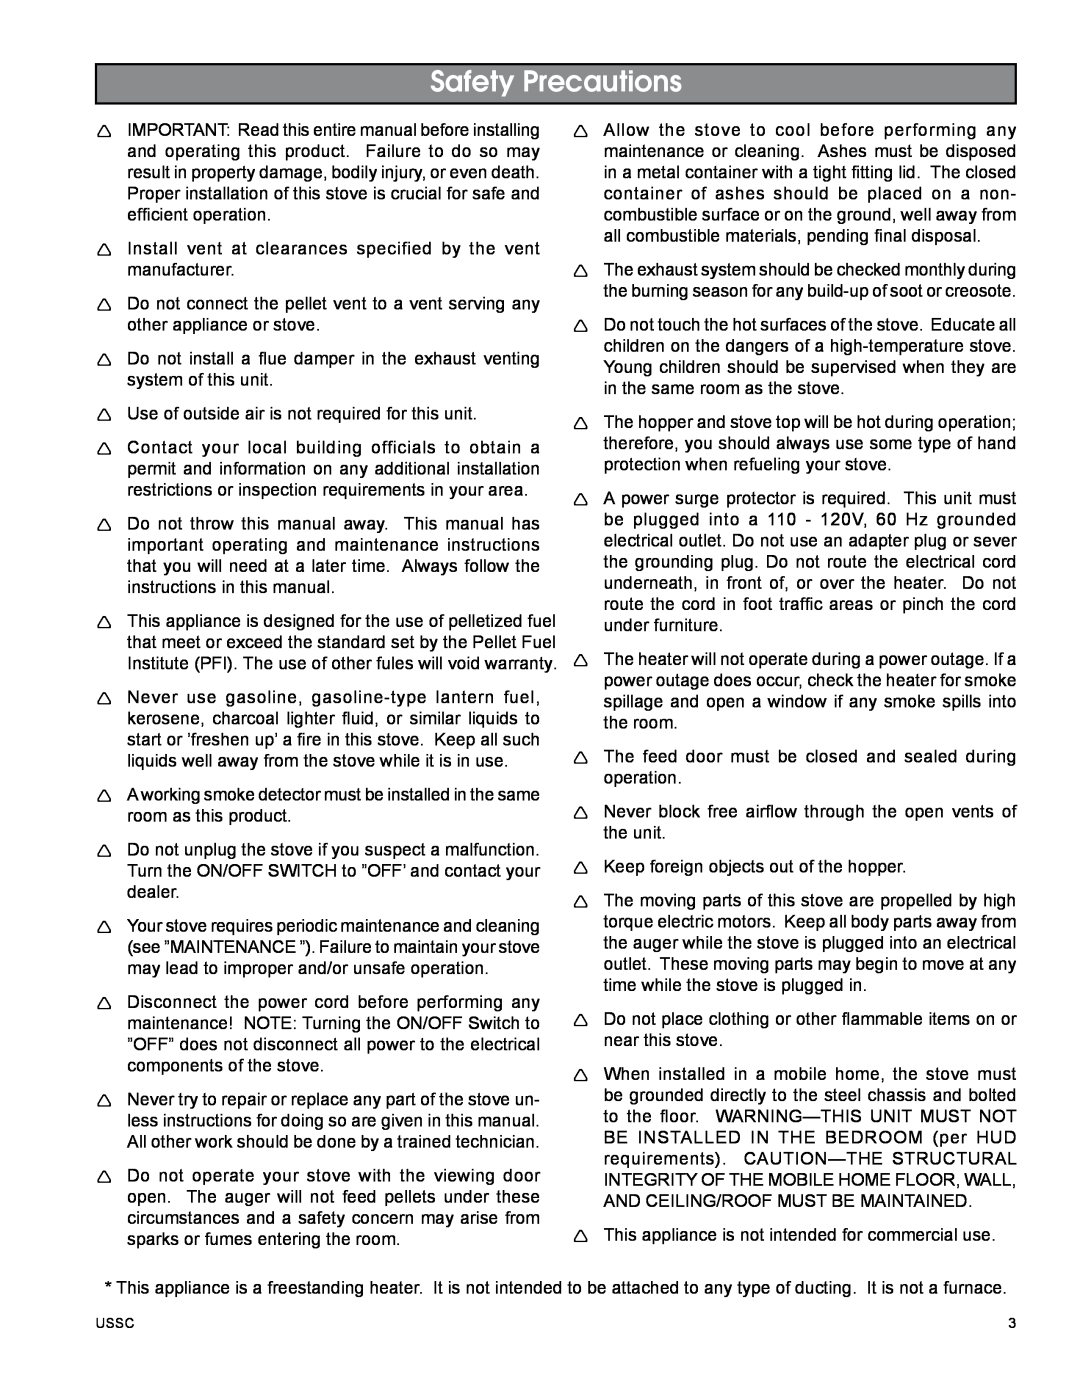 United States Stove 5510 owner manual Safety Precautions 